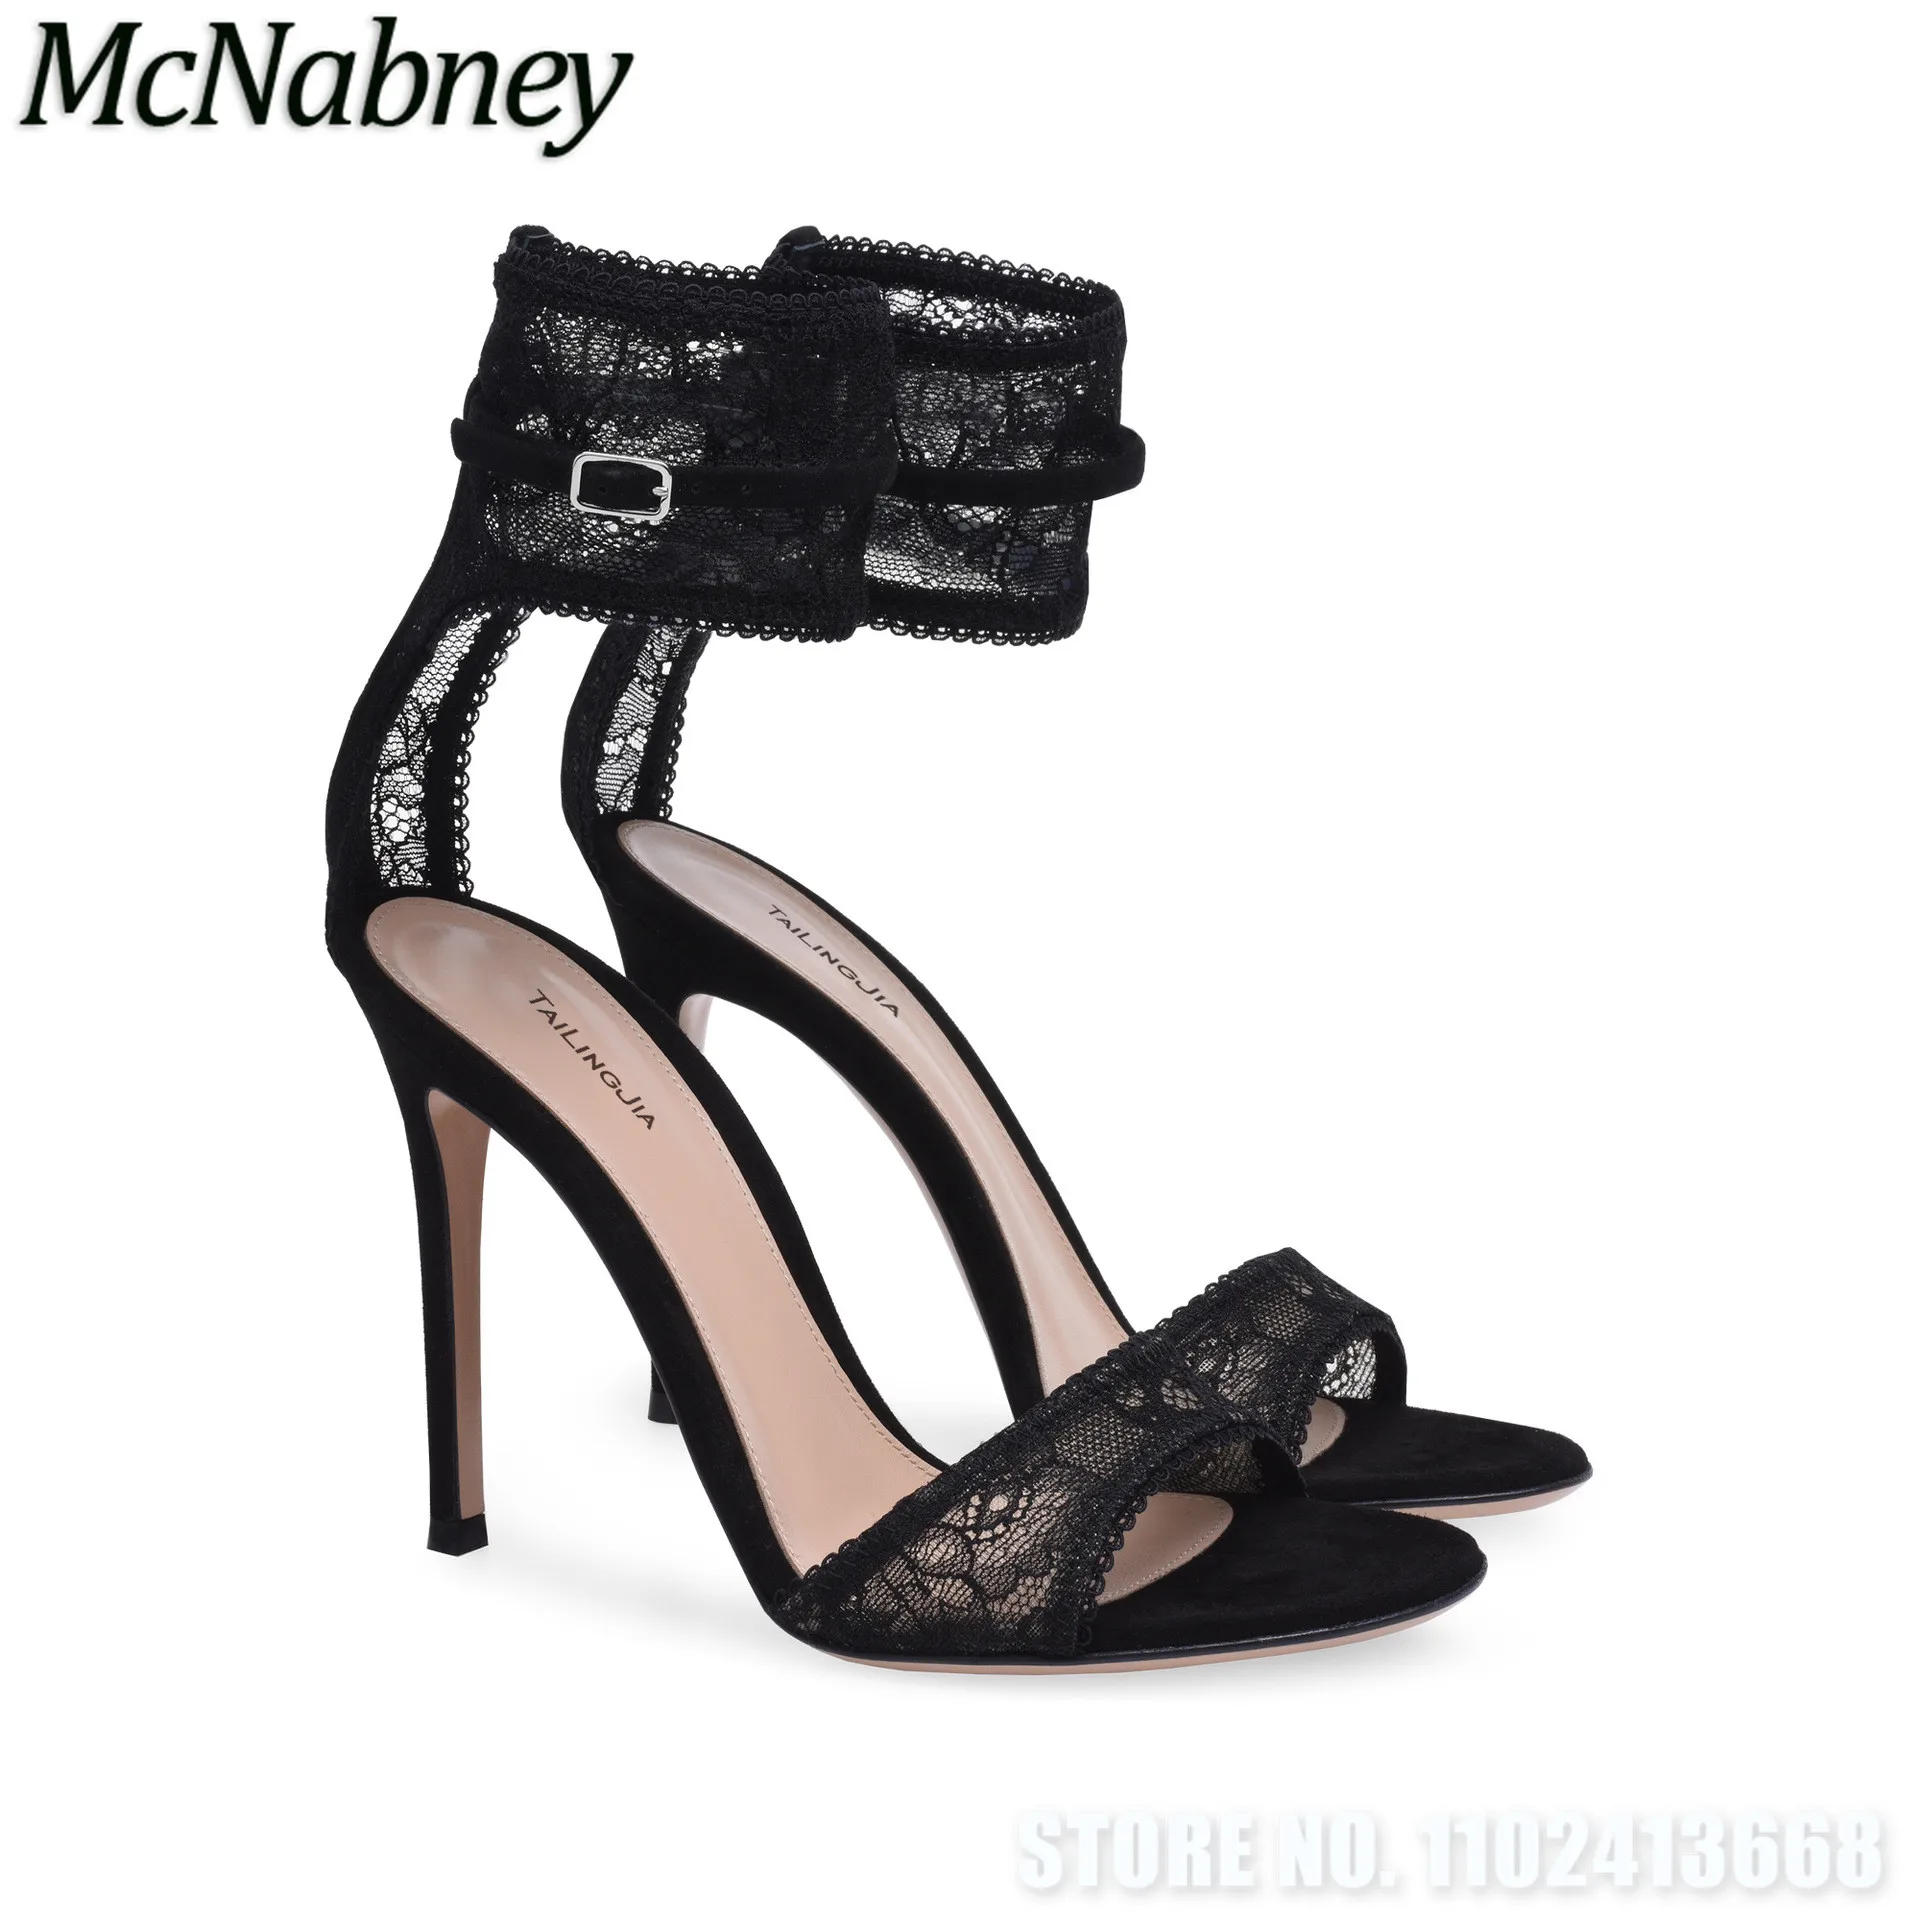 

Black Sexy Mesh Lace High Heels Peep Toe Stiletto Heel Sandals Ankle Lace Strap Buckle Narrow Bands Concise Lady Party Pumps